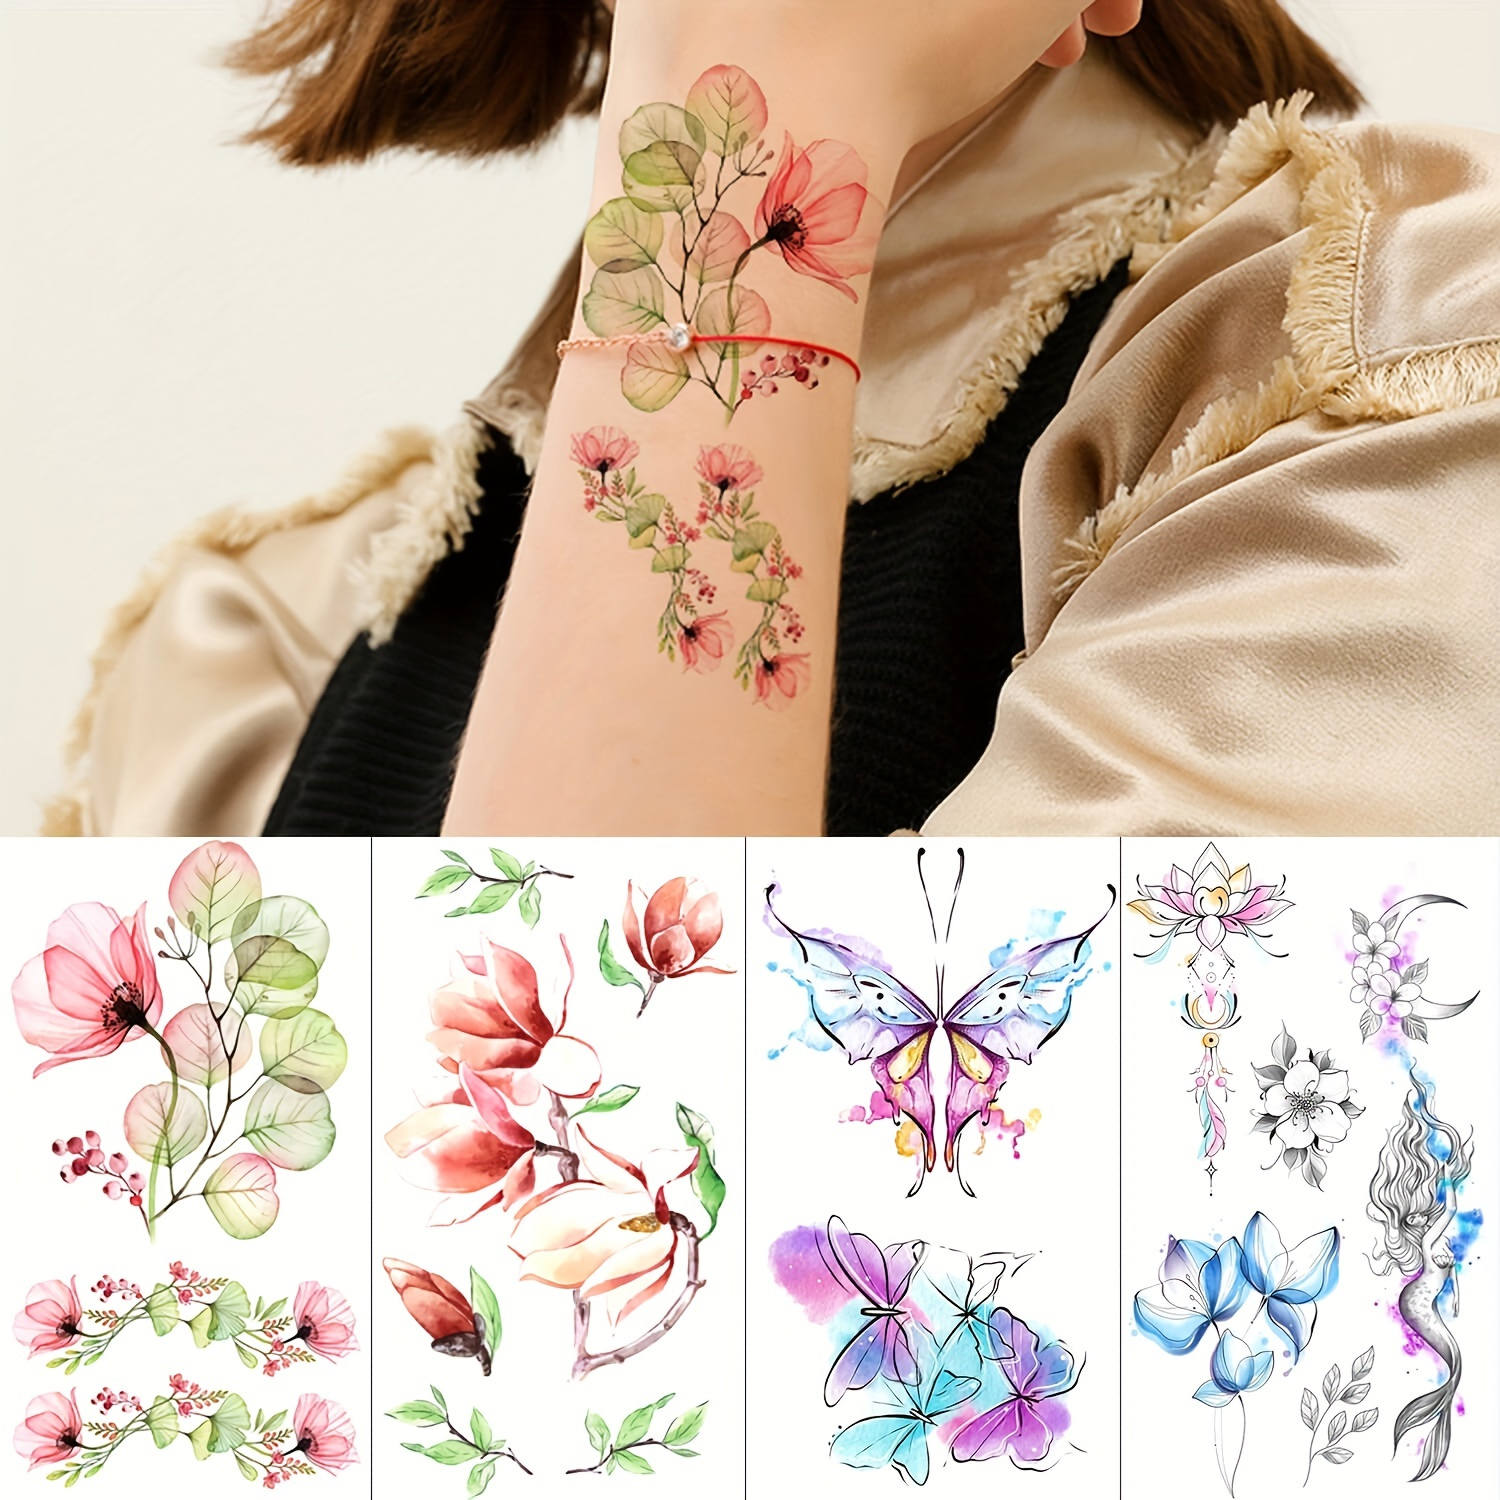 

30 Sheets Flowers Temporary Tattoos Stickers, Roses, Butterflies And Multi-colored Mixed Style, Body Art Temporary Tattoos For Women, Girls